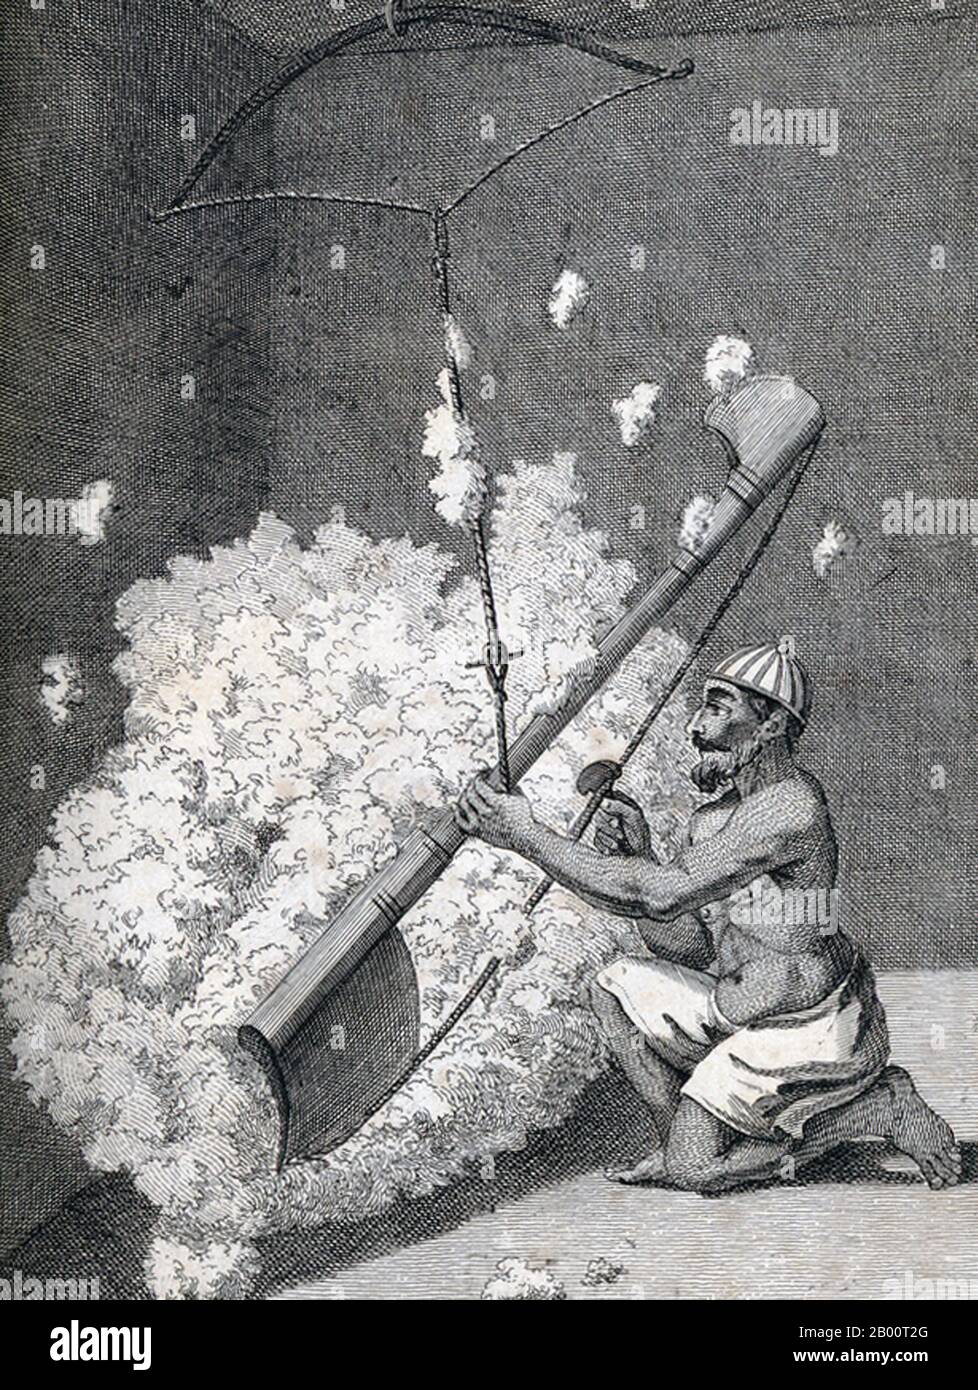 India/France: 'An Chulia (Tamil Muslim) Carding Cotton'. Engraving by Pierre Sonnerat (1748-1814), 1782.  Pierre Sonnerat (1748-1814) was a French naturalist and explorer who made several voyages to Southeast Asia between 1769 and 1781. He published this two-volume account of his voyage in 1782.  Volume 1 deals exclusively with India, whose culture Sonnerat very much admired, and is especially noteworthy for its extended discussion of religion in India, Hinduism in particular. Stock Photo